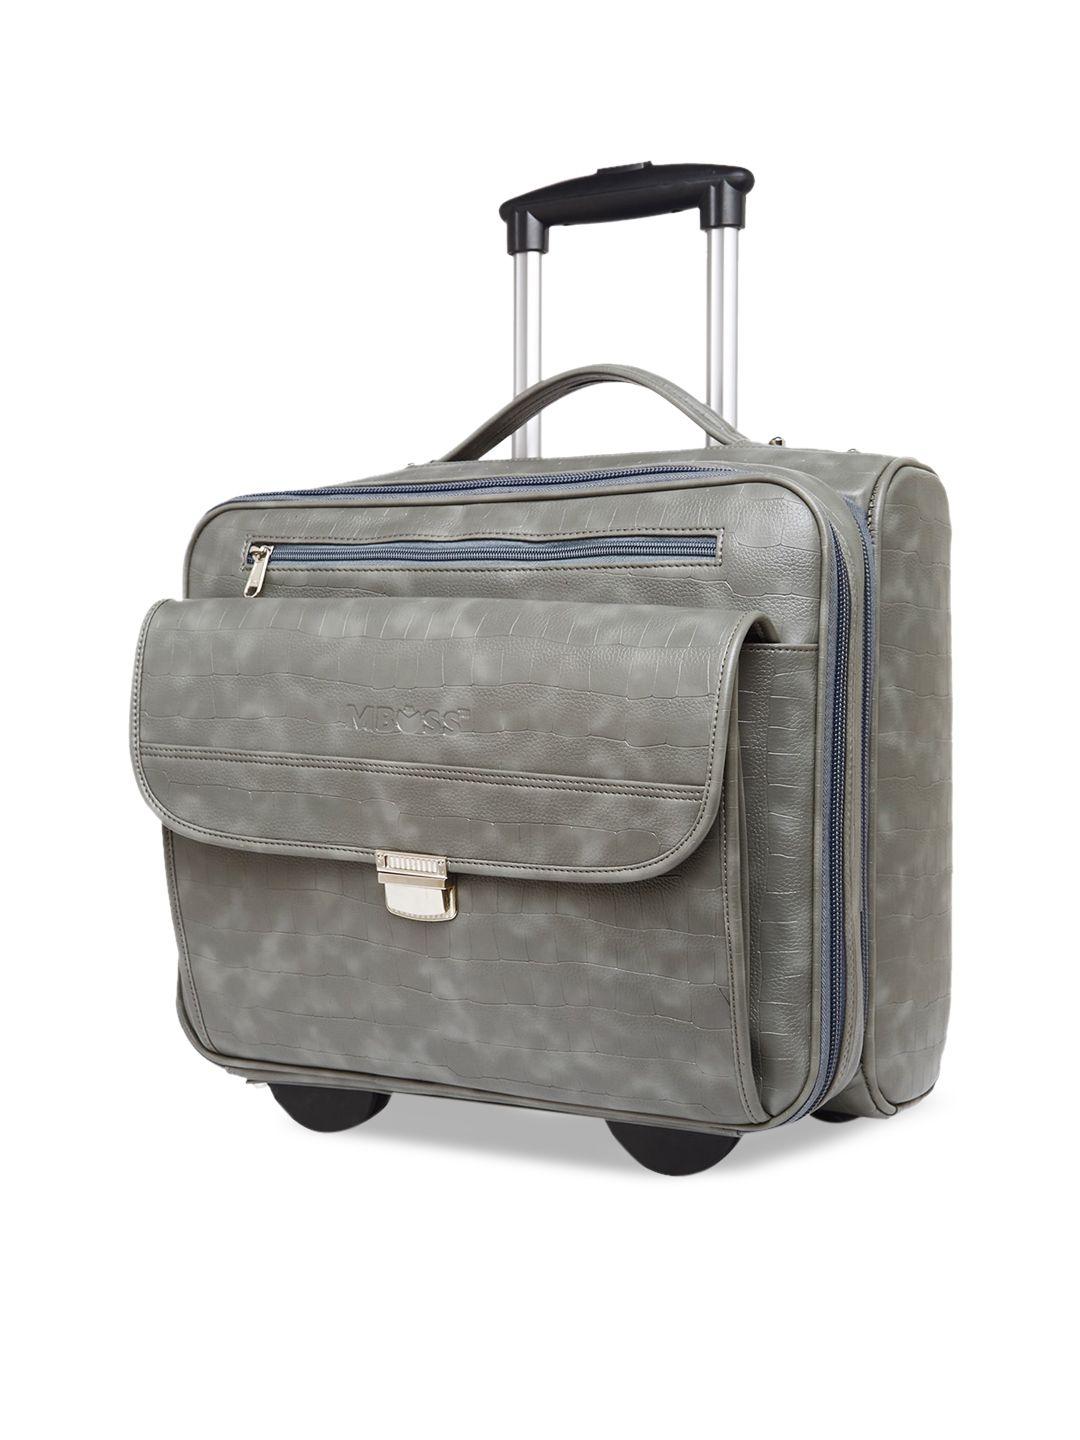 mboss grey textured cabin trolley bag with laptop compartment